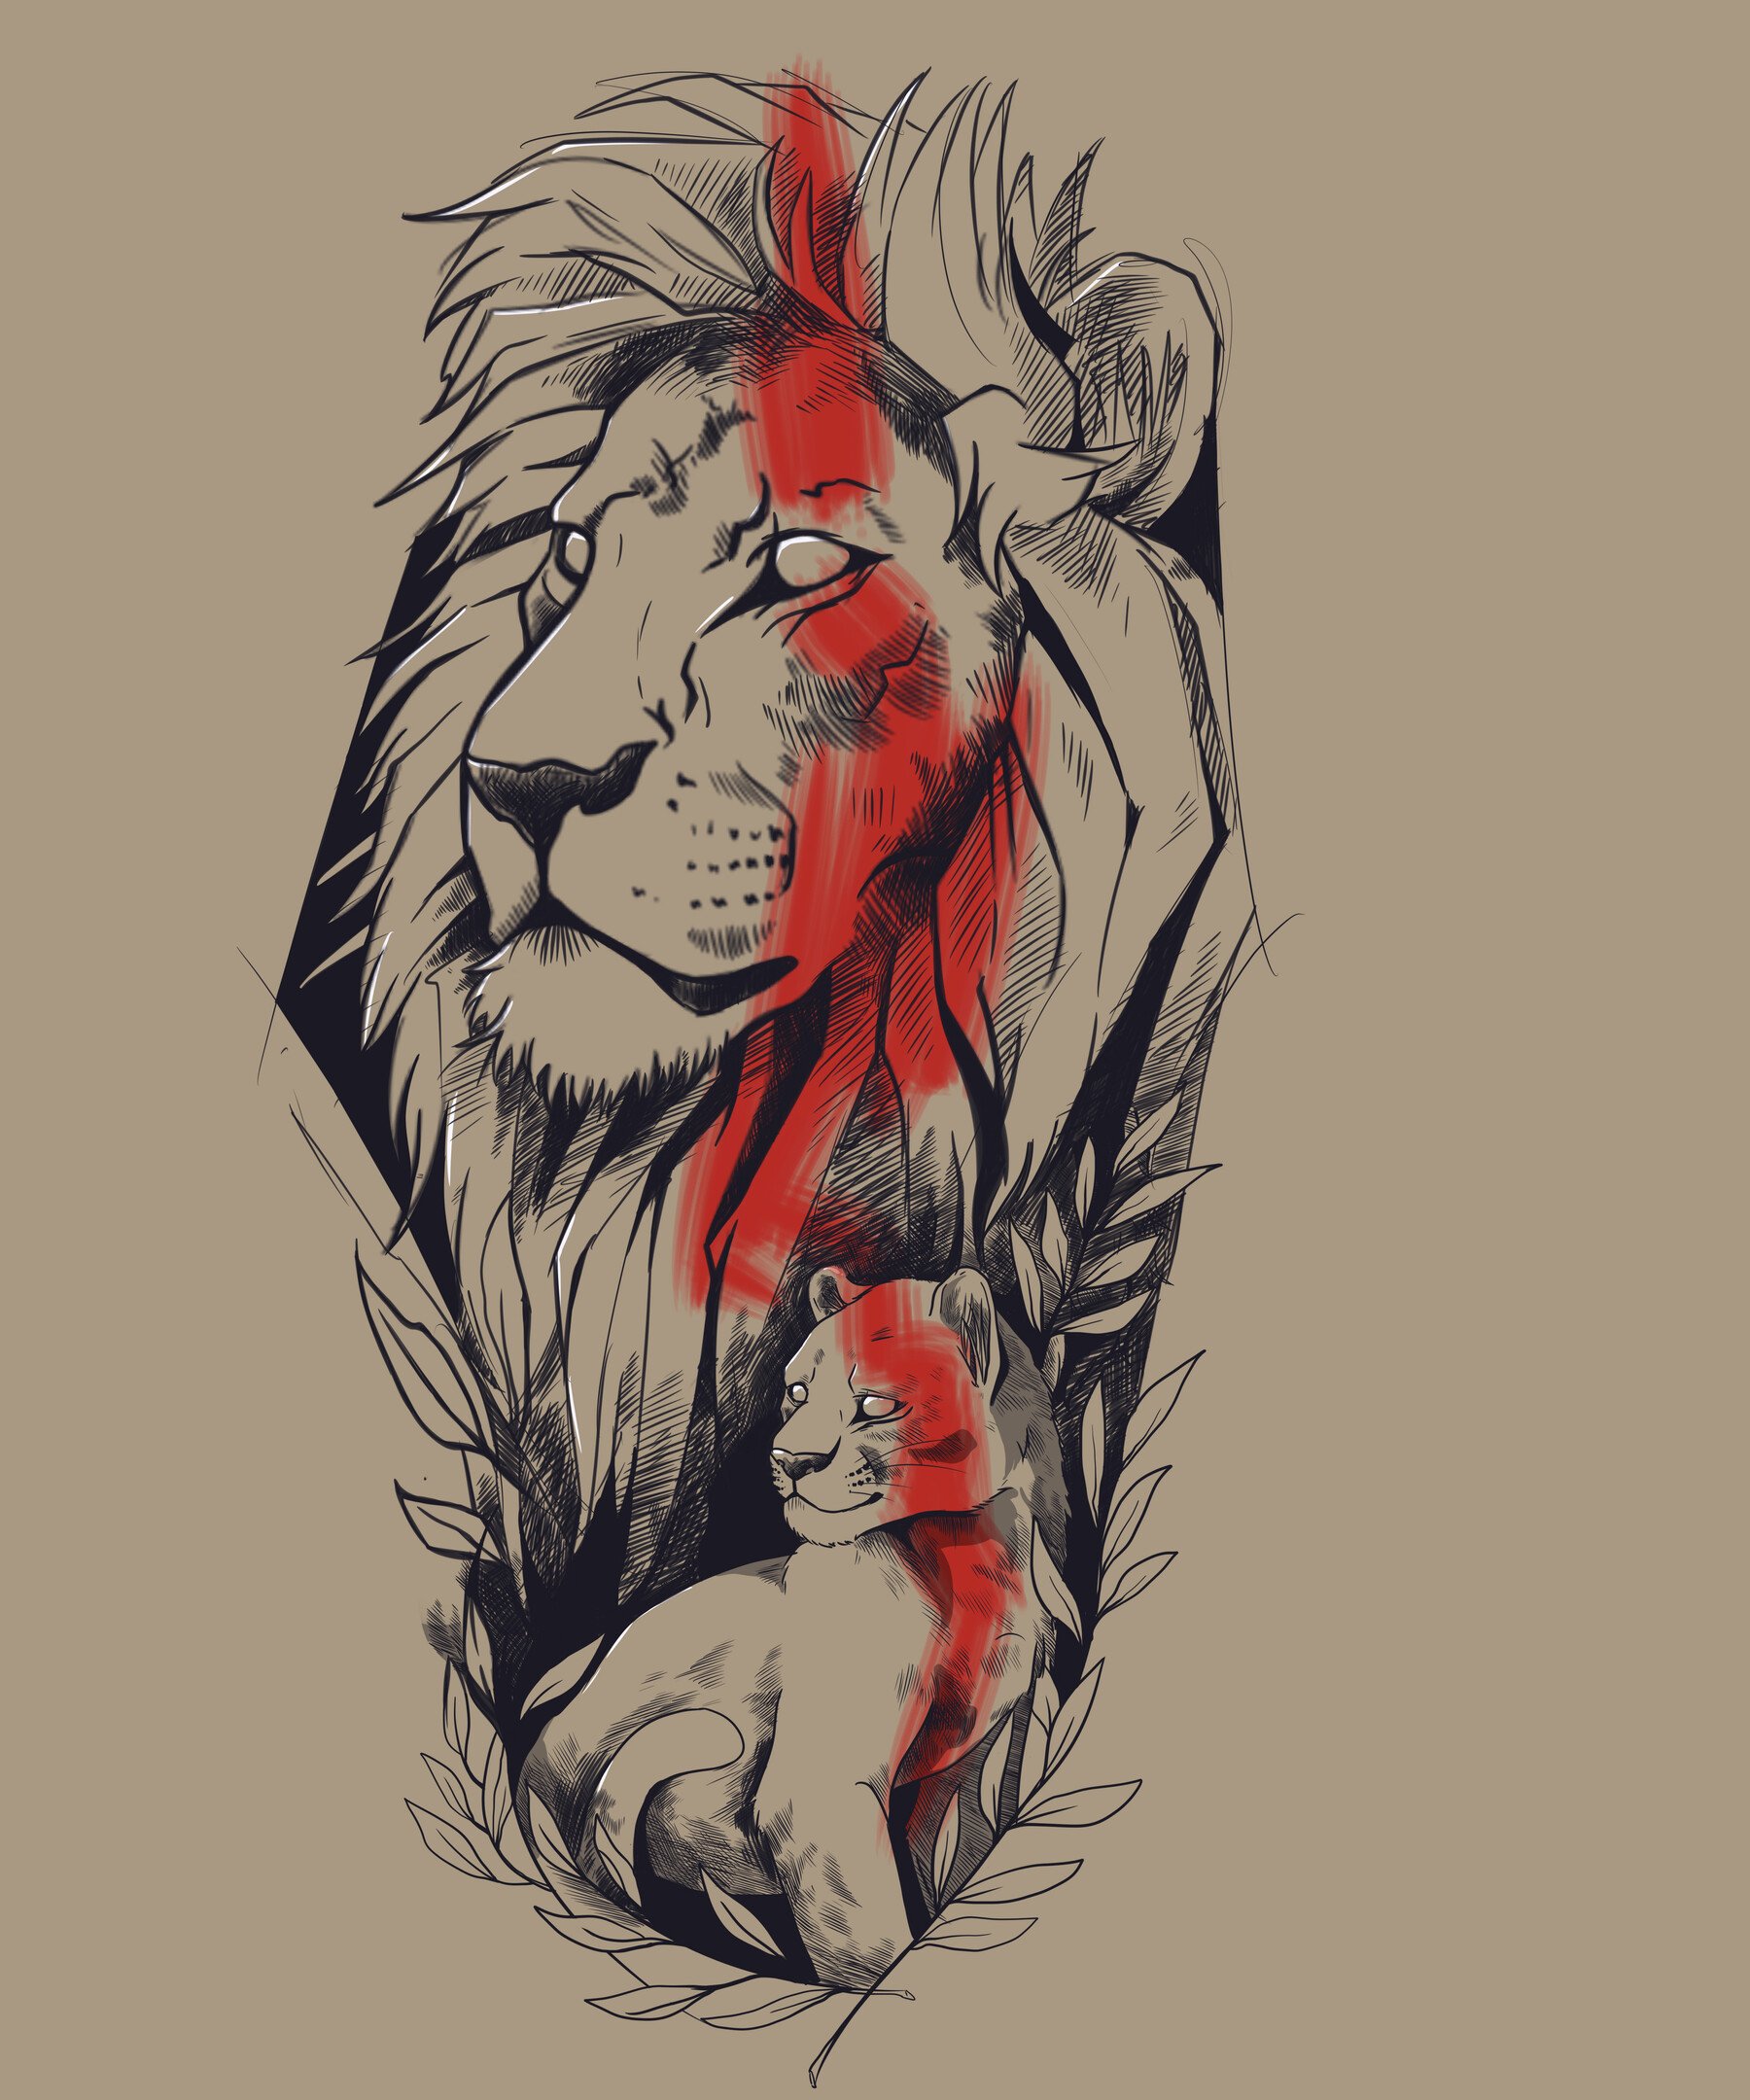 ArtStation - Tattoo design - Lion. Fits well on the forearm. | Artworks